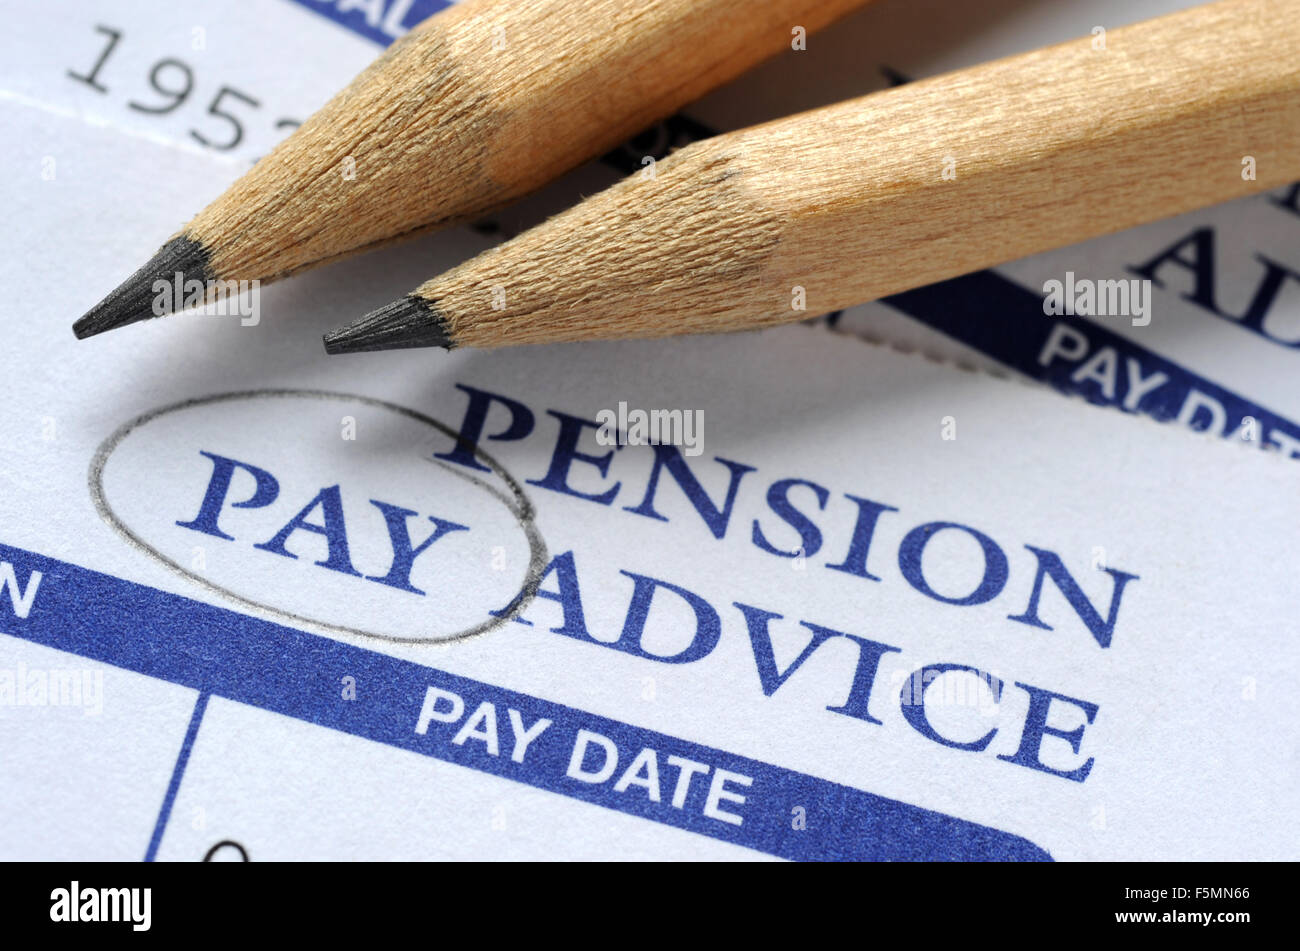 PENSION PAY ADVICE WITH PENCILS RE COMPANY PENSION SCHEME PRIVATE INCOMES RETIREMENT PENSIONERS OLD AGE SAVINGS PENSIONS MONEY Stock Photo